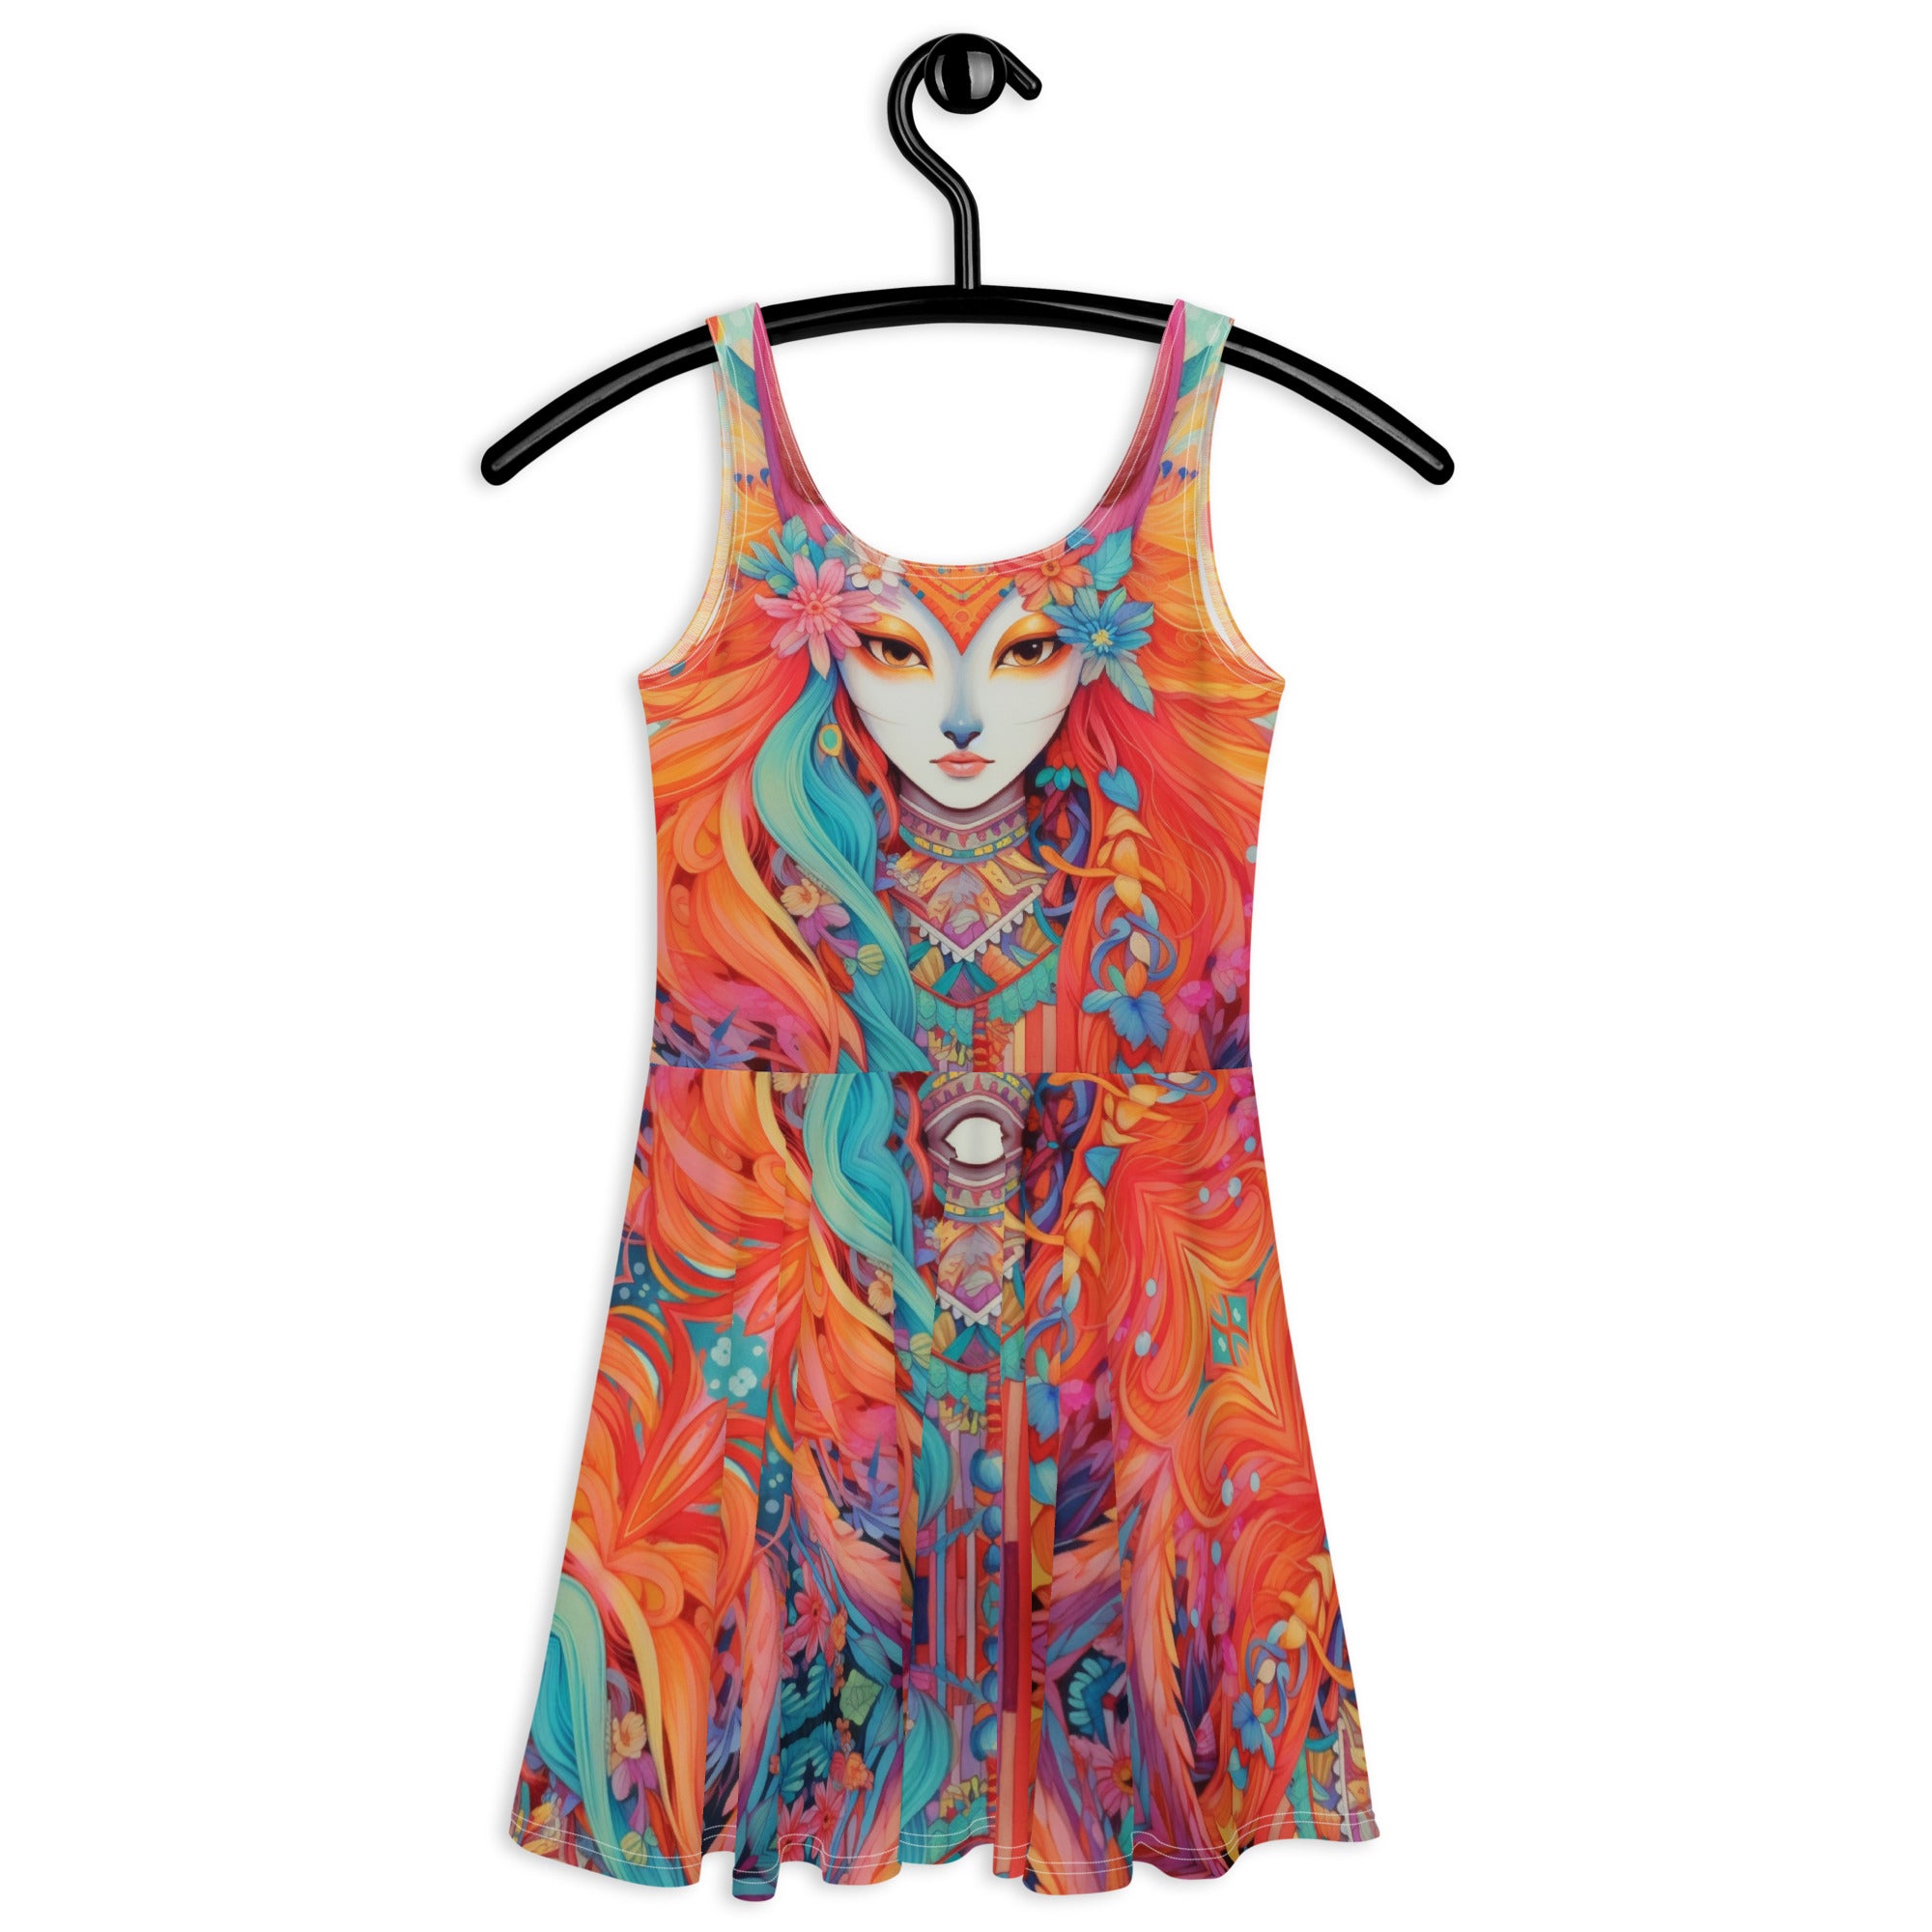 Stunning Kitsune Fairy Skater Dress - A Vibrant and Flattering Addition to Your Wardrobe!